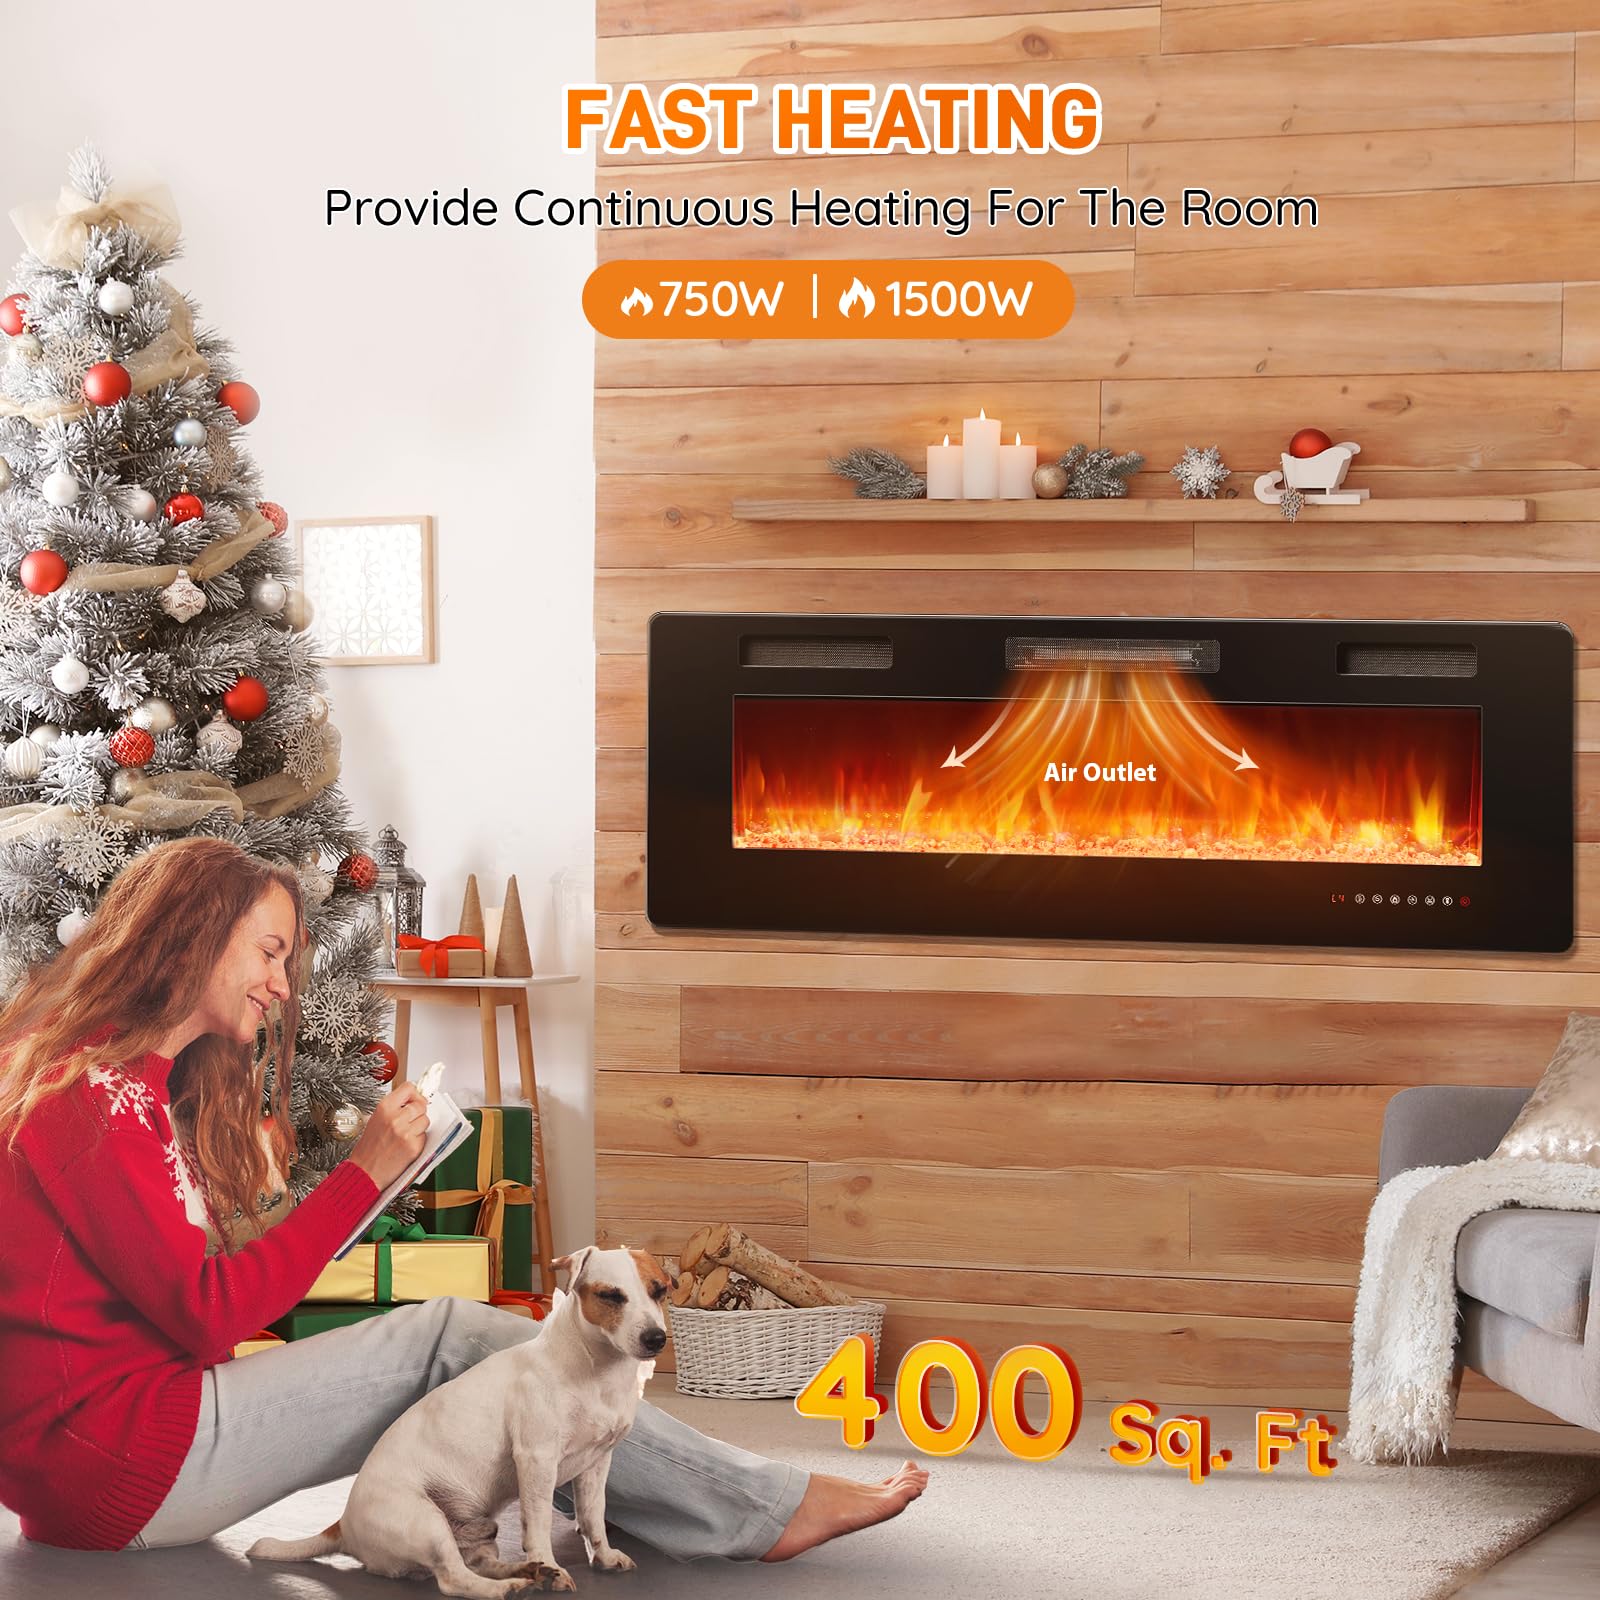 Rintuf Electric Fireplace, 60’’ Recessed & Wall Mounted Electric Fireplace Inserts, Wall Fireplace Electric with Remote Control, Low Noise, Touch Screen, Adjustable Flame Color/Speed, 750/1500W